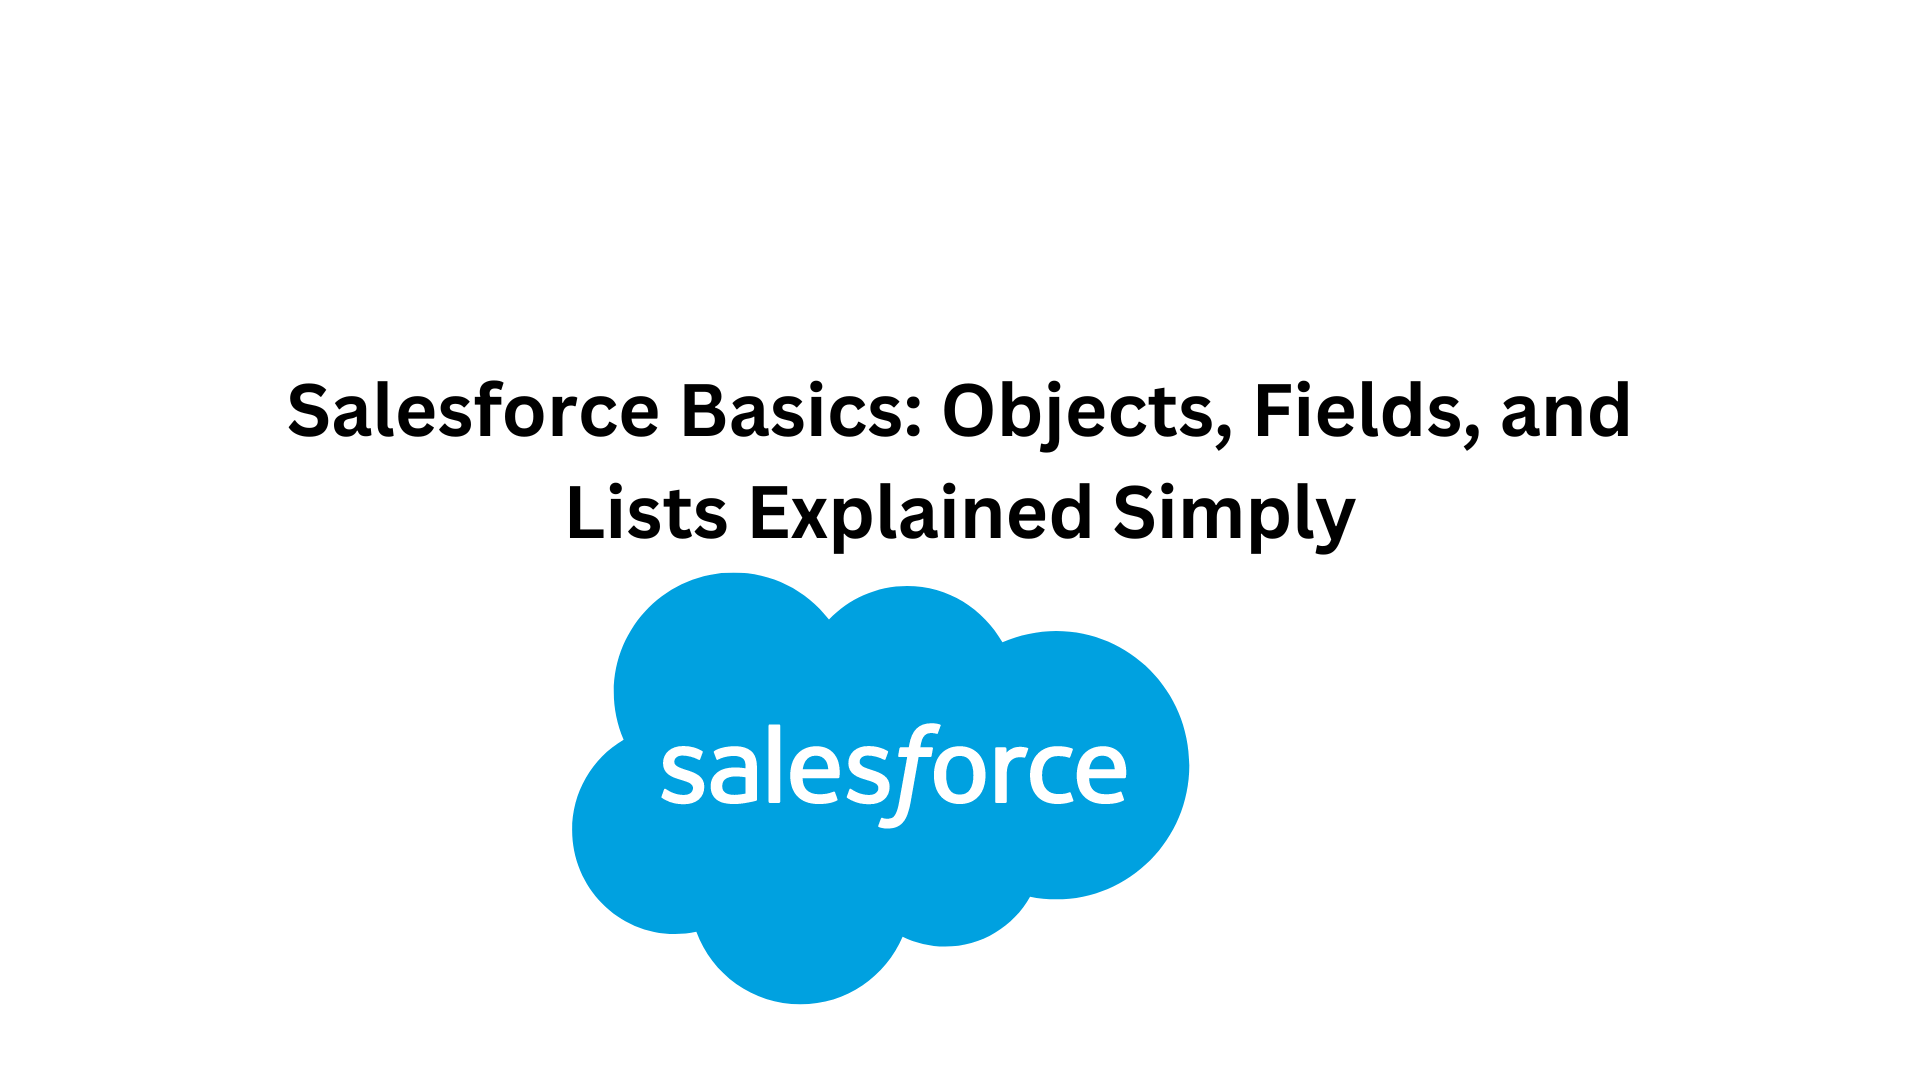 Salesforce Basics Objects, Fields, and Lists Explained Simply